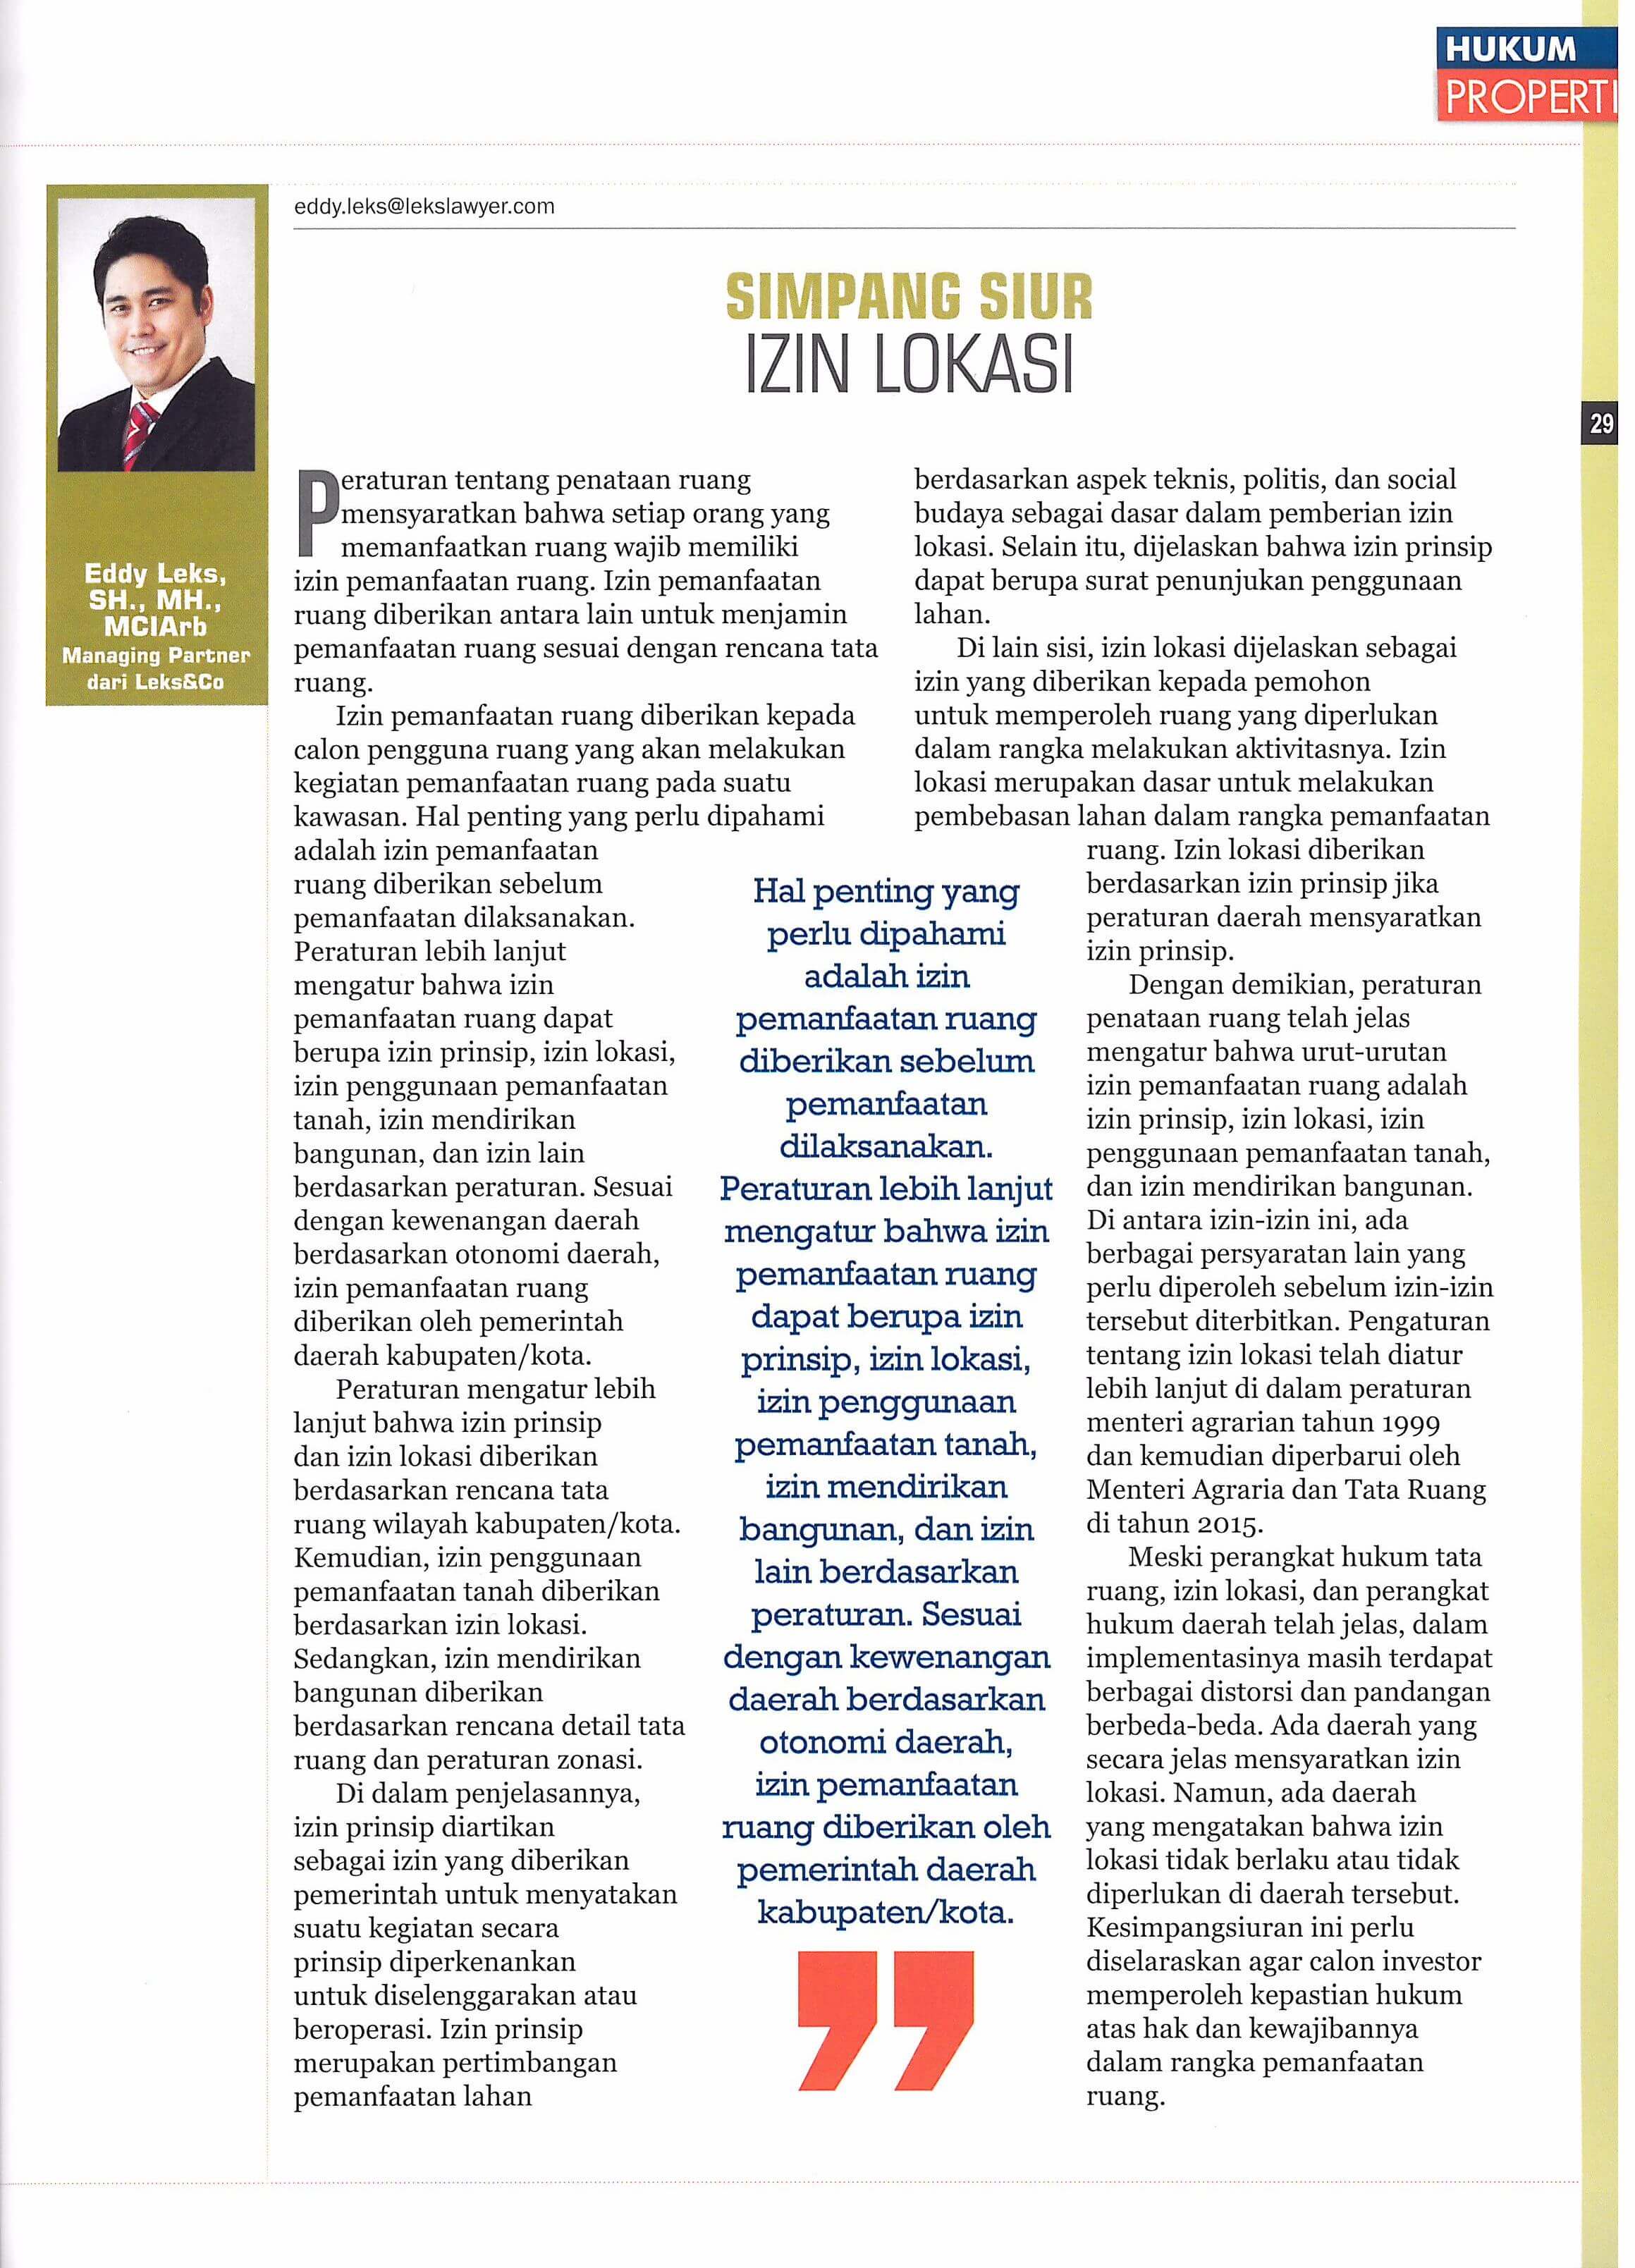 Article of Eddy Leks on Property&Bank Magazine - March 2016